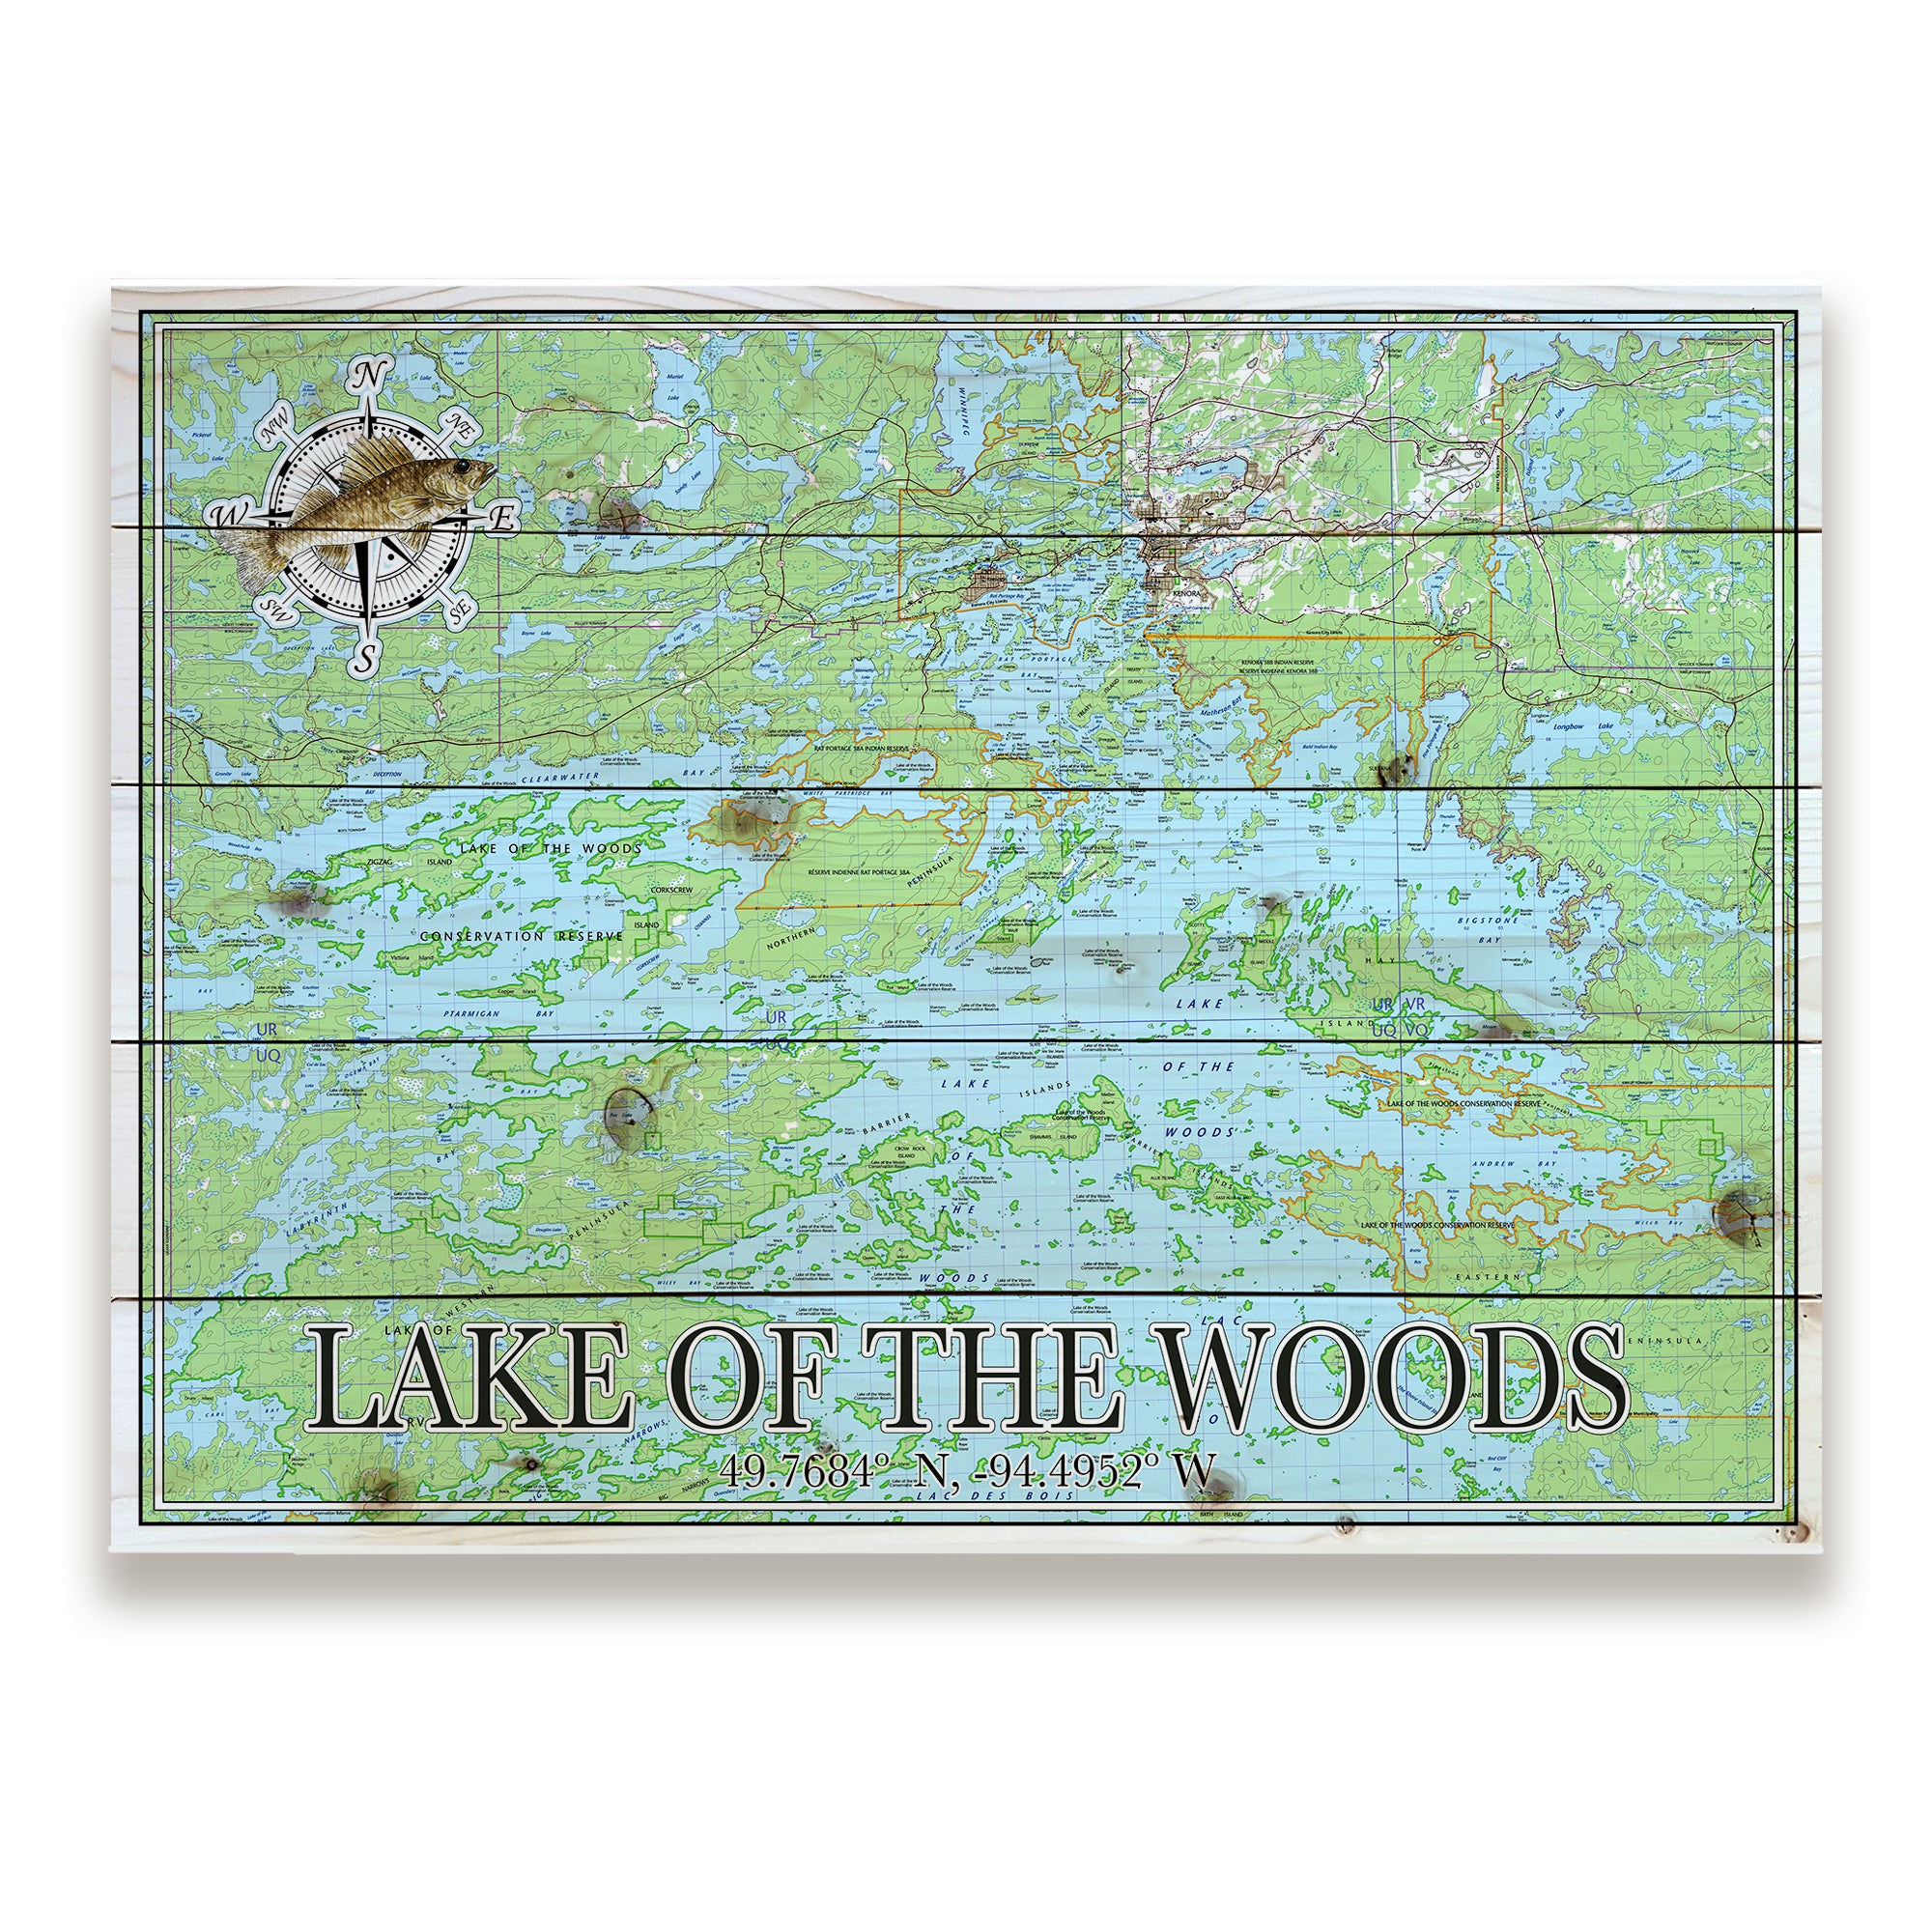 Lake of the Woods, Ontario Pallet Map